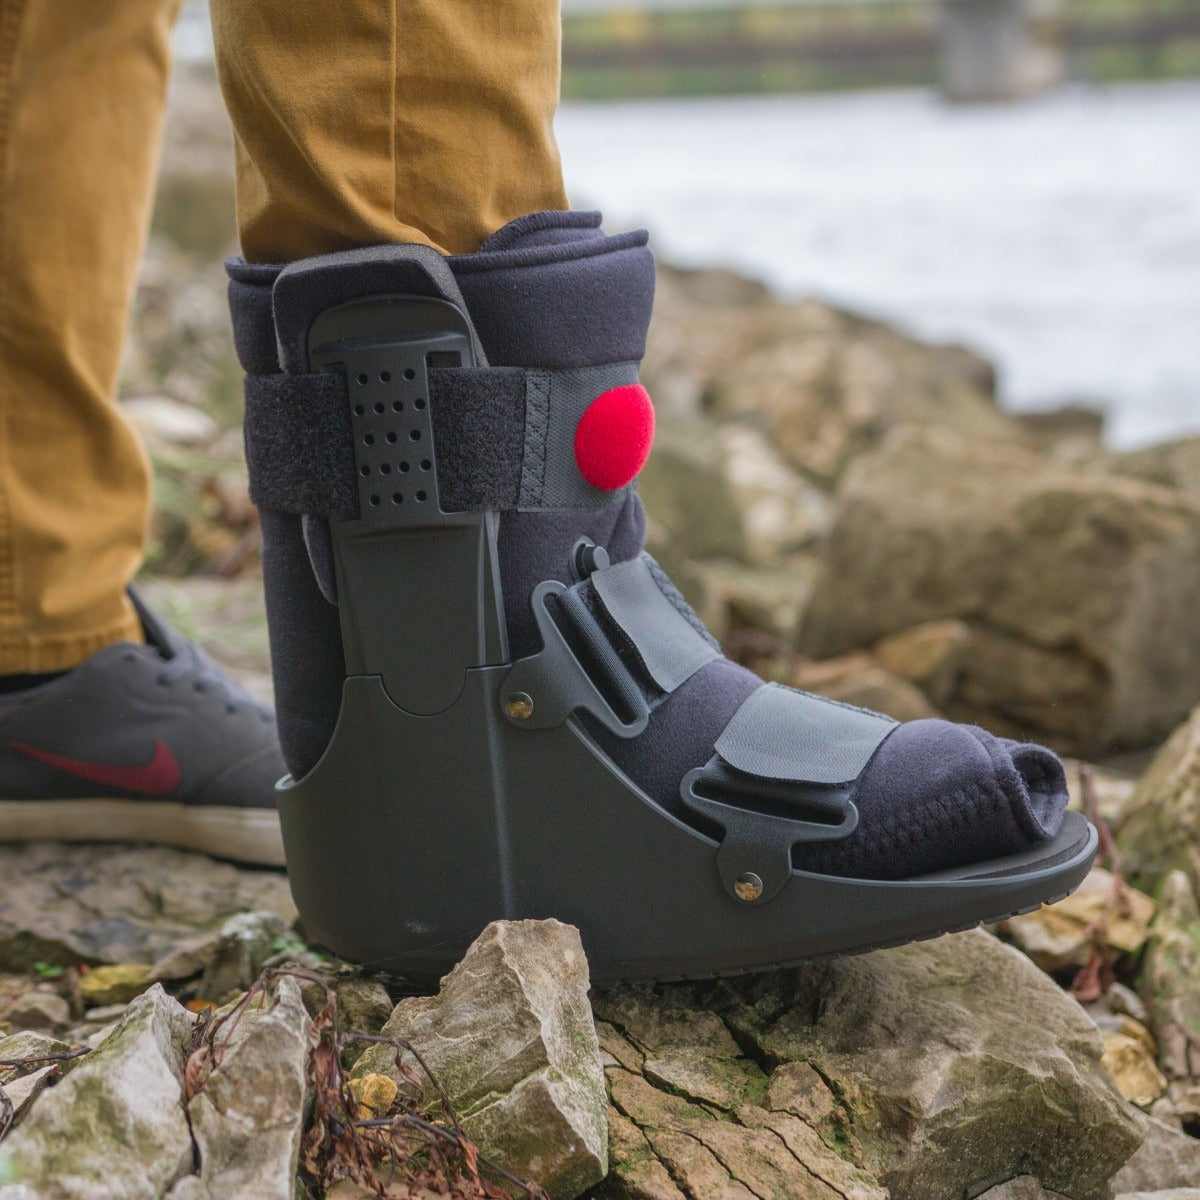 Air Walker Boot  Foot Cast Boot for Ankle Sprains & Stress Fractures